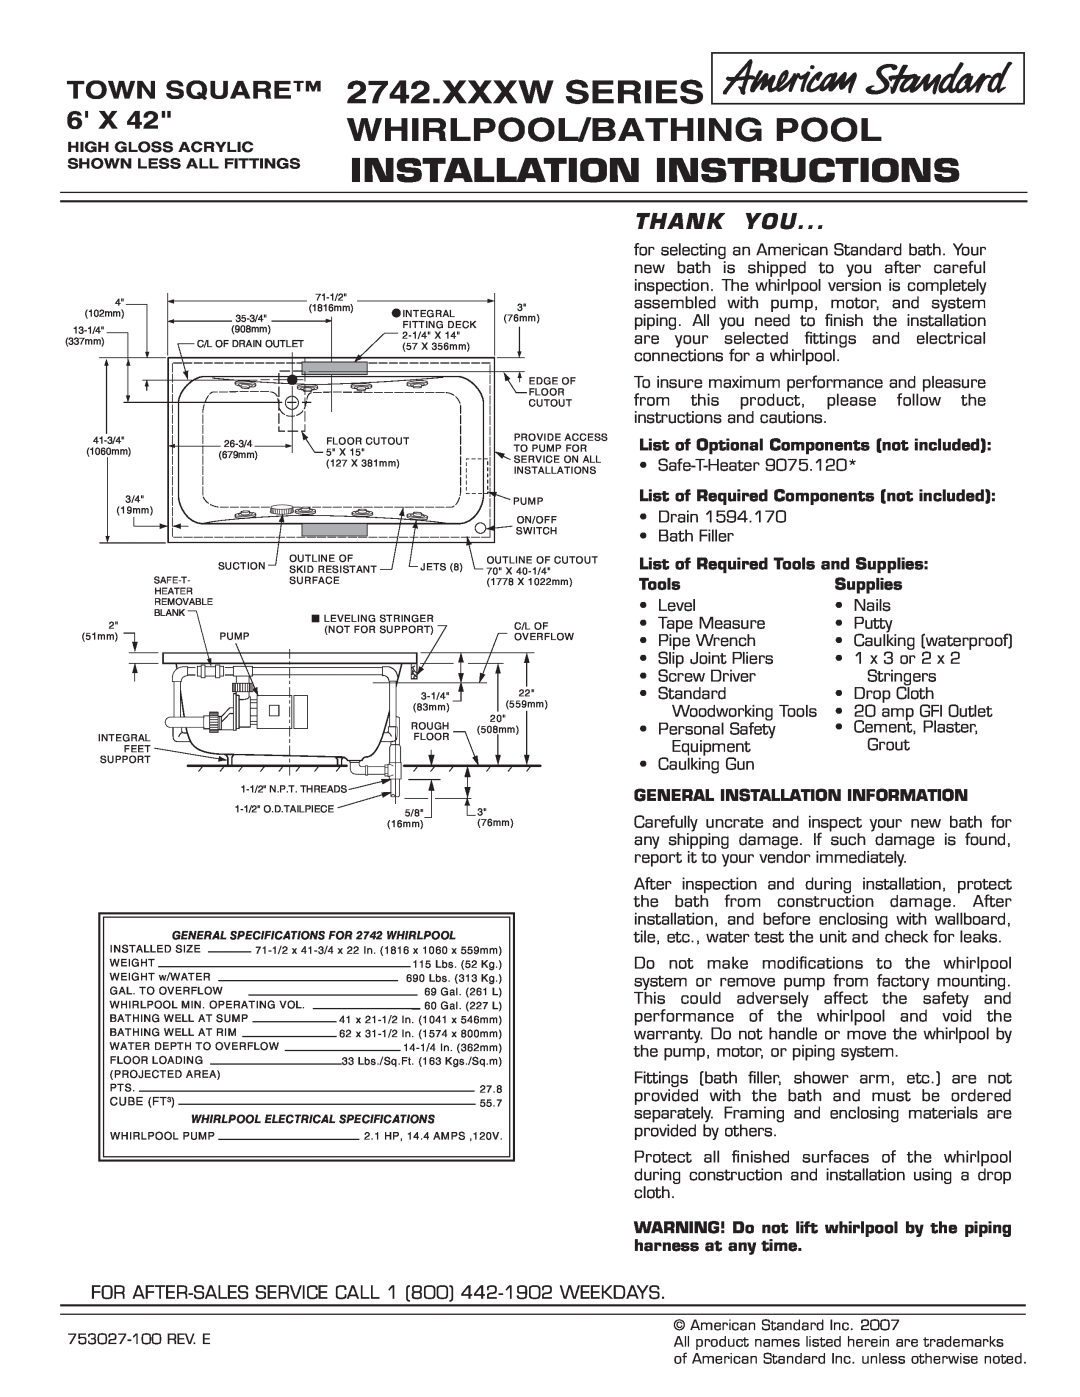 American Standard 2742.XXXW Series installation instructions Town Square, Thank You, List of Required Tools and Supplies 